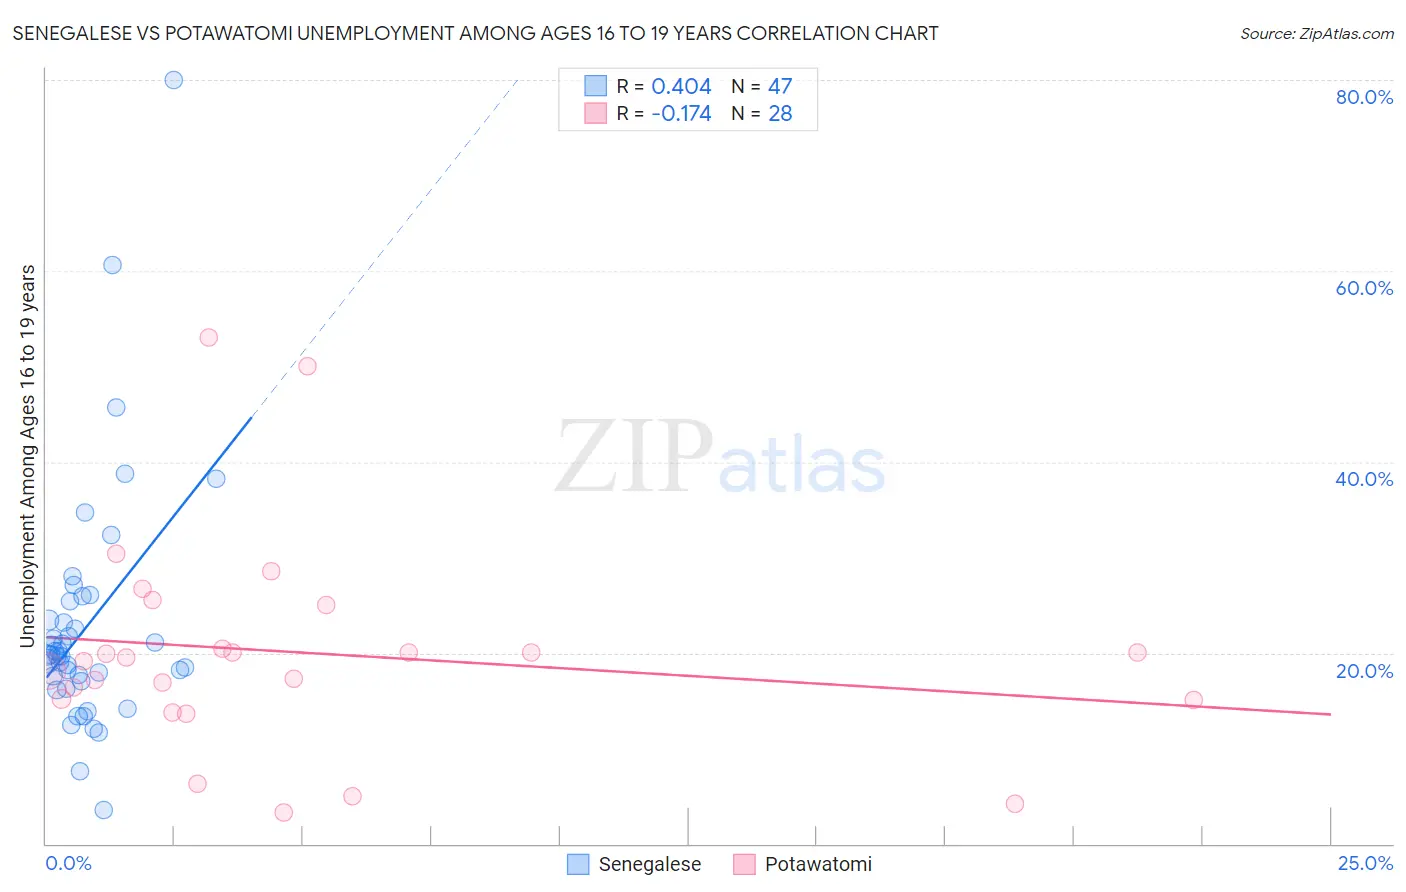 Senegalese vs Potawatomi Unemployment Among Ages 16 to 19 years